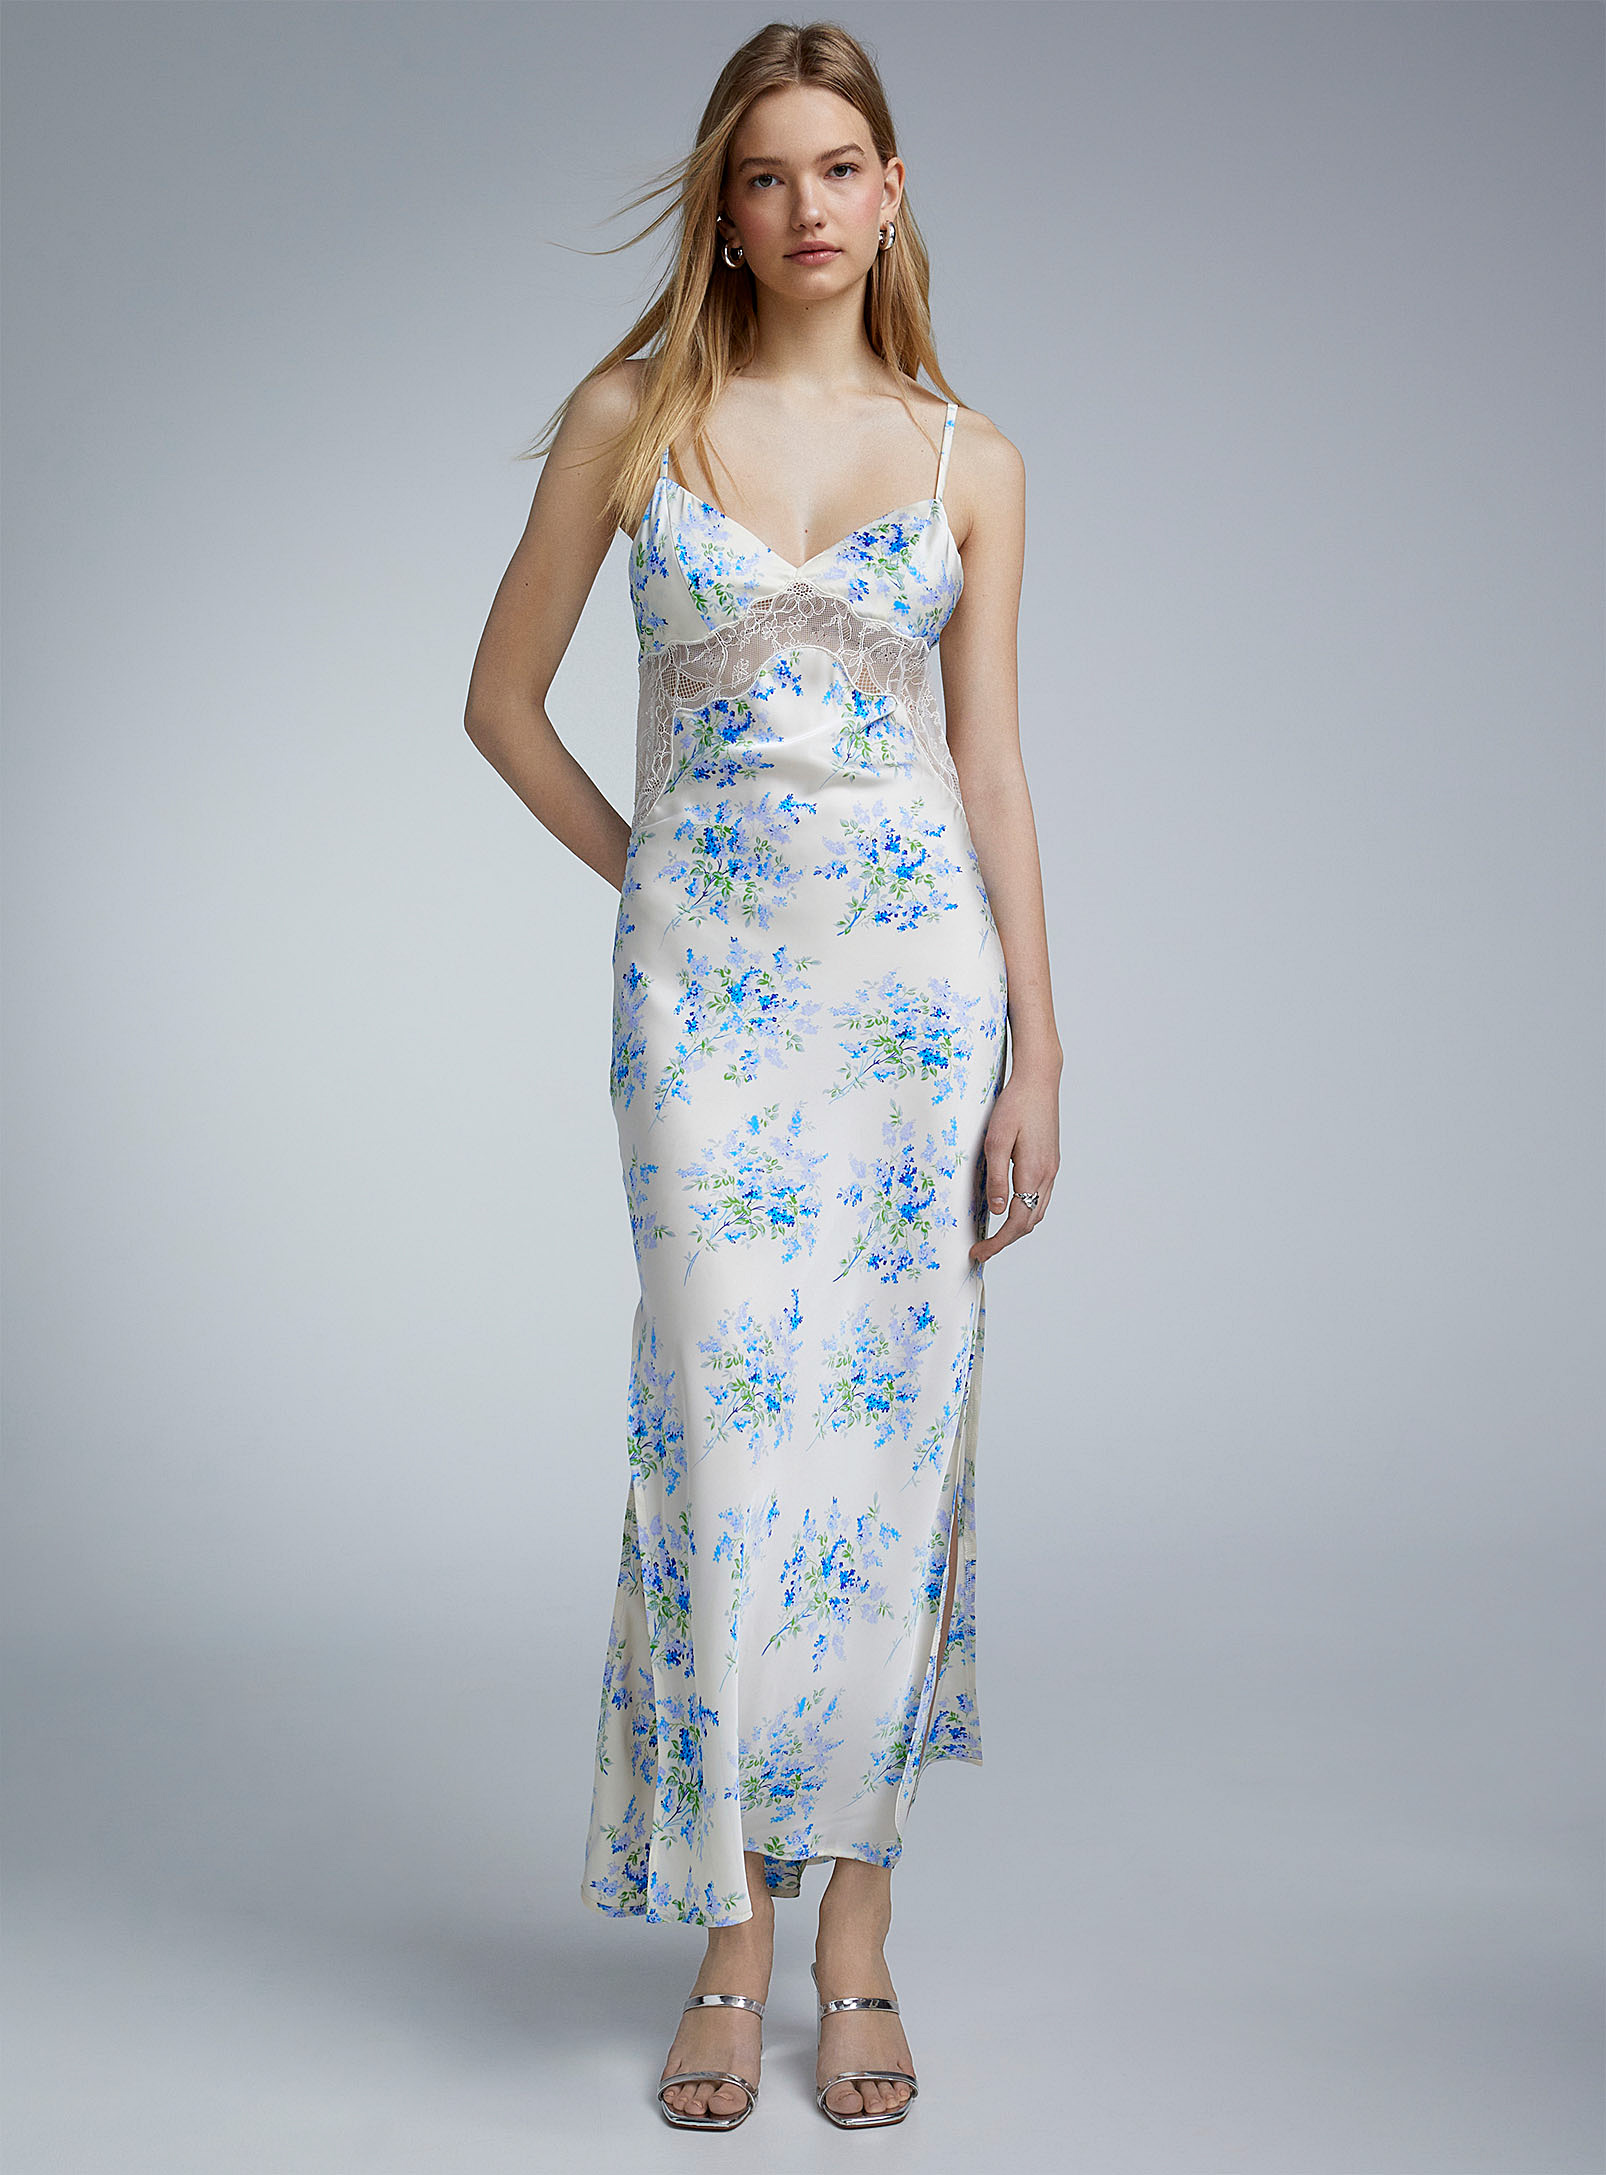 Twik Flowers Lace And Satin Dress In Patterned White